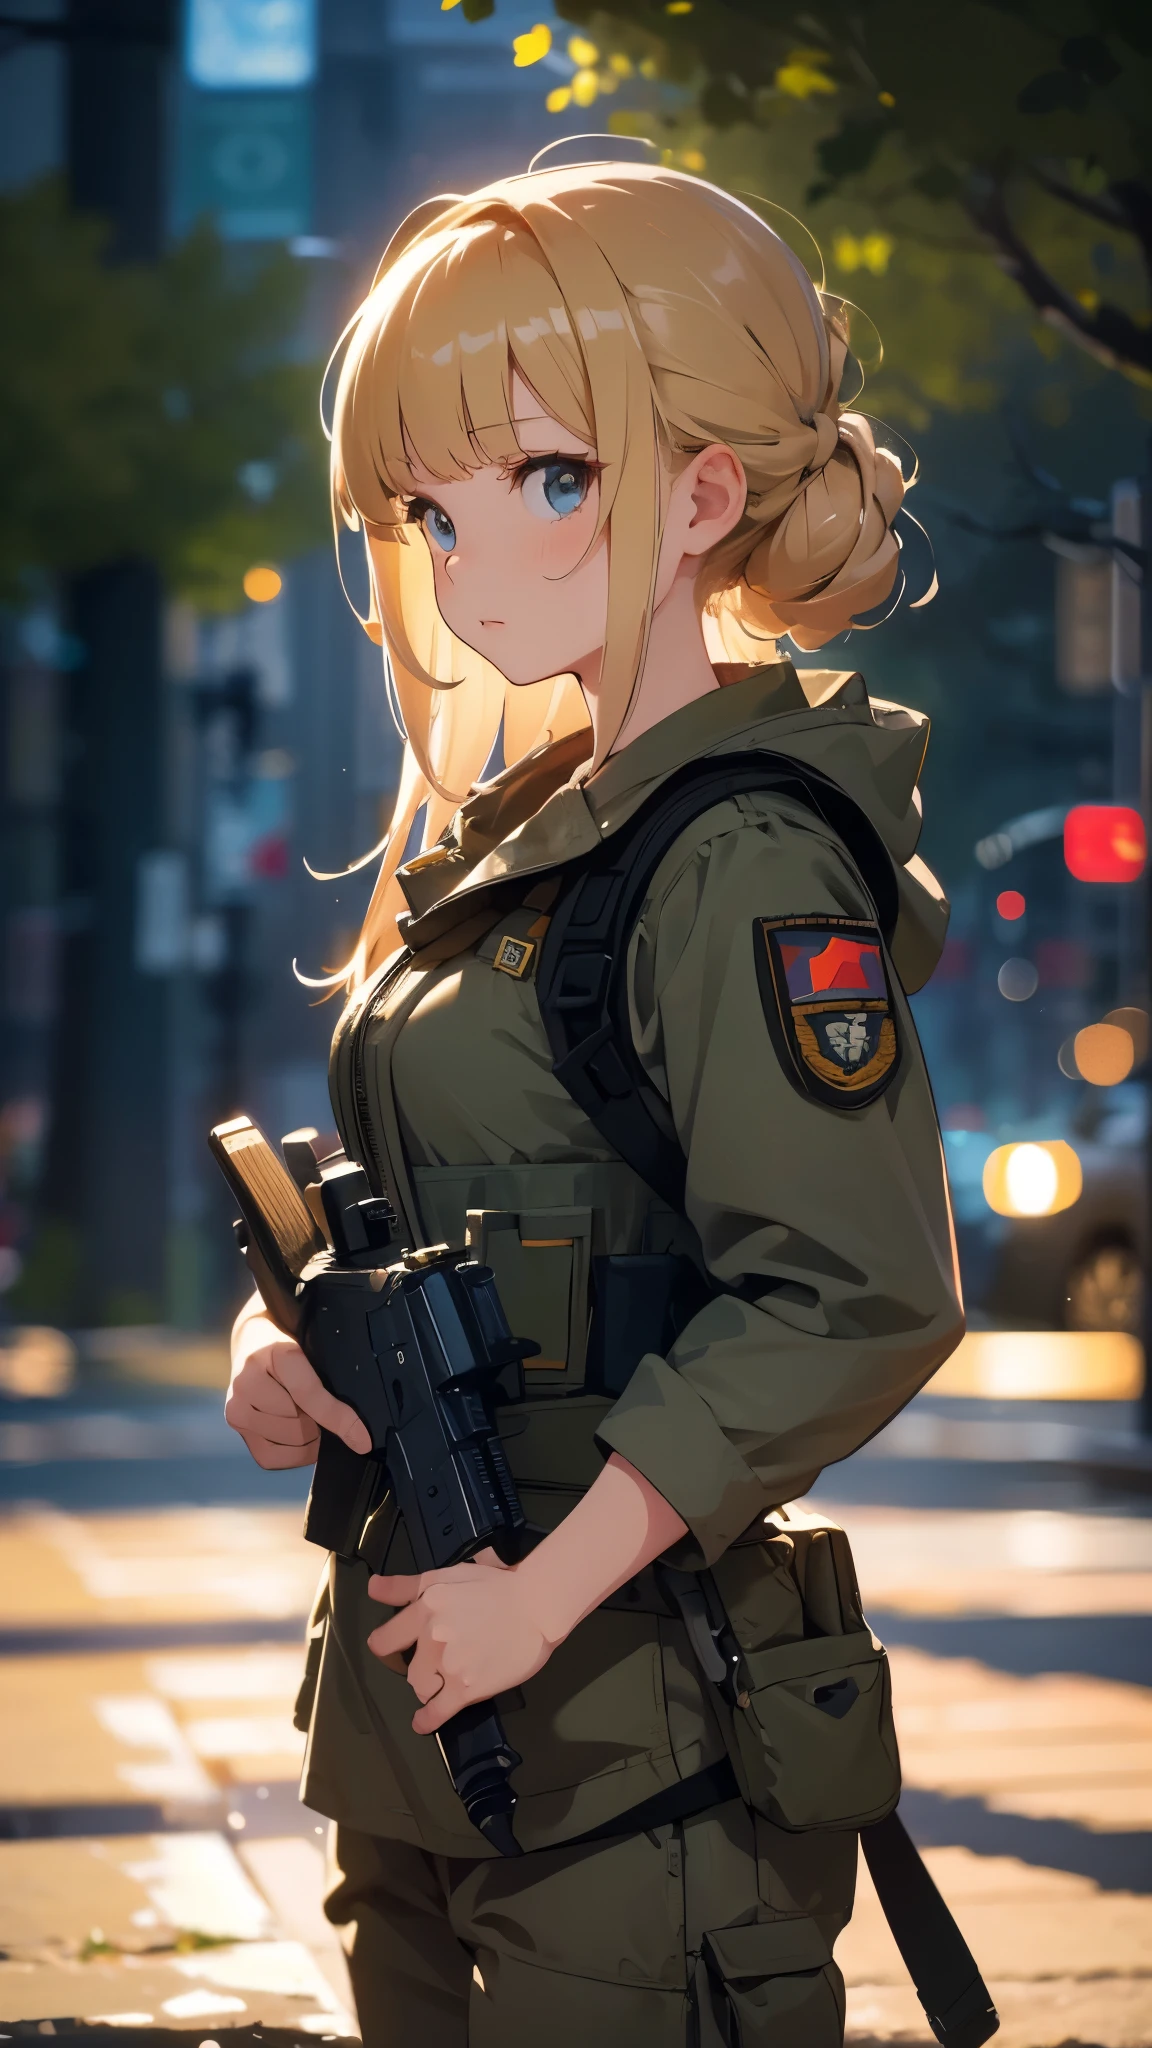 best picture quality, 8K, high quality, masterpiece:1.2), ((masterpiece)), (high detail, high quality, best picture quality), bokeh, DOF, Portrait, open stance, (cute illustration:1.2), blond hair, military, girl, holding gun, standing